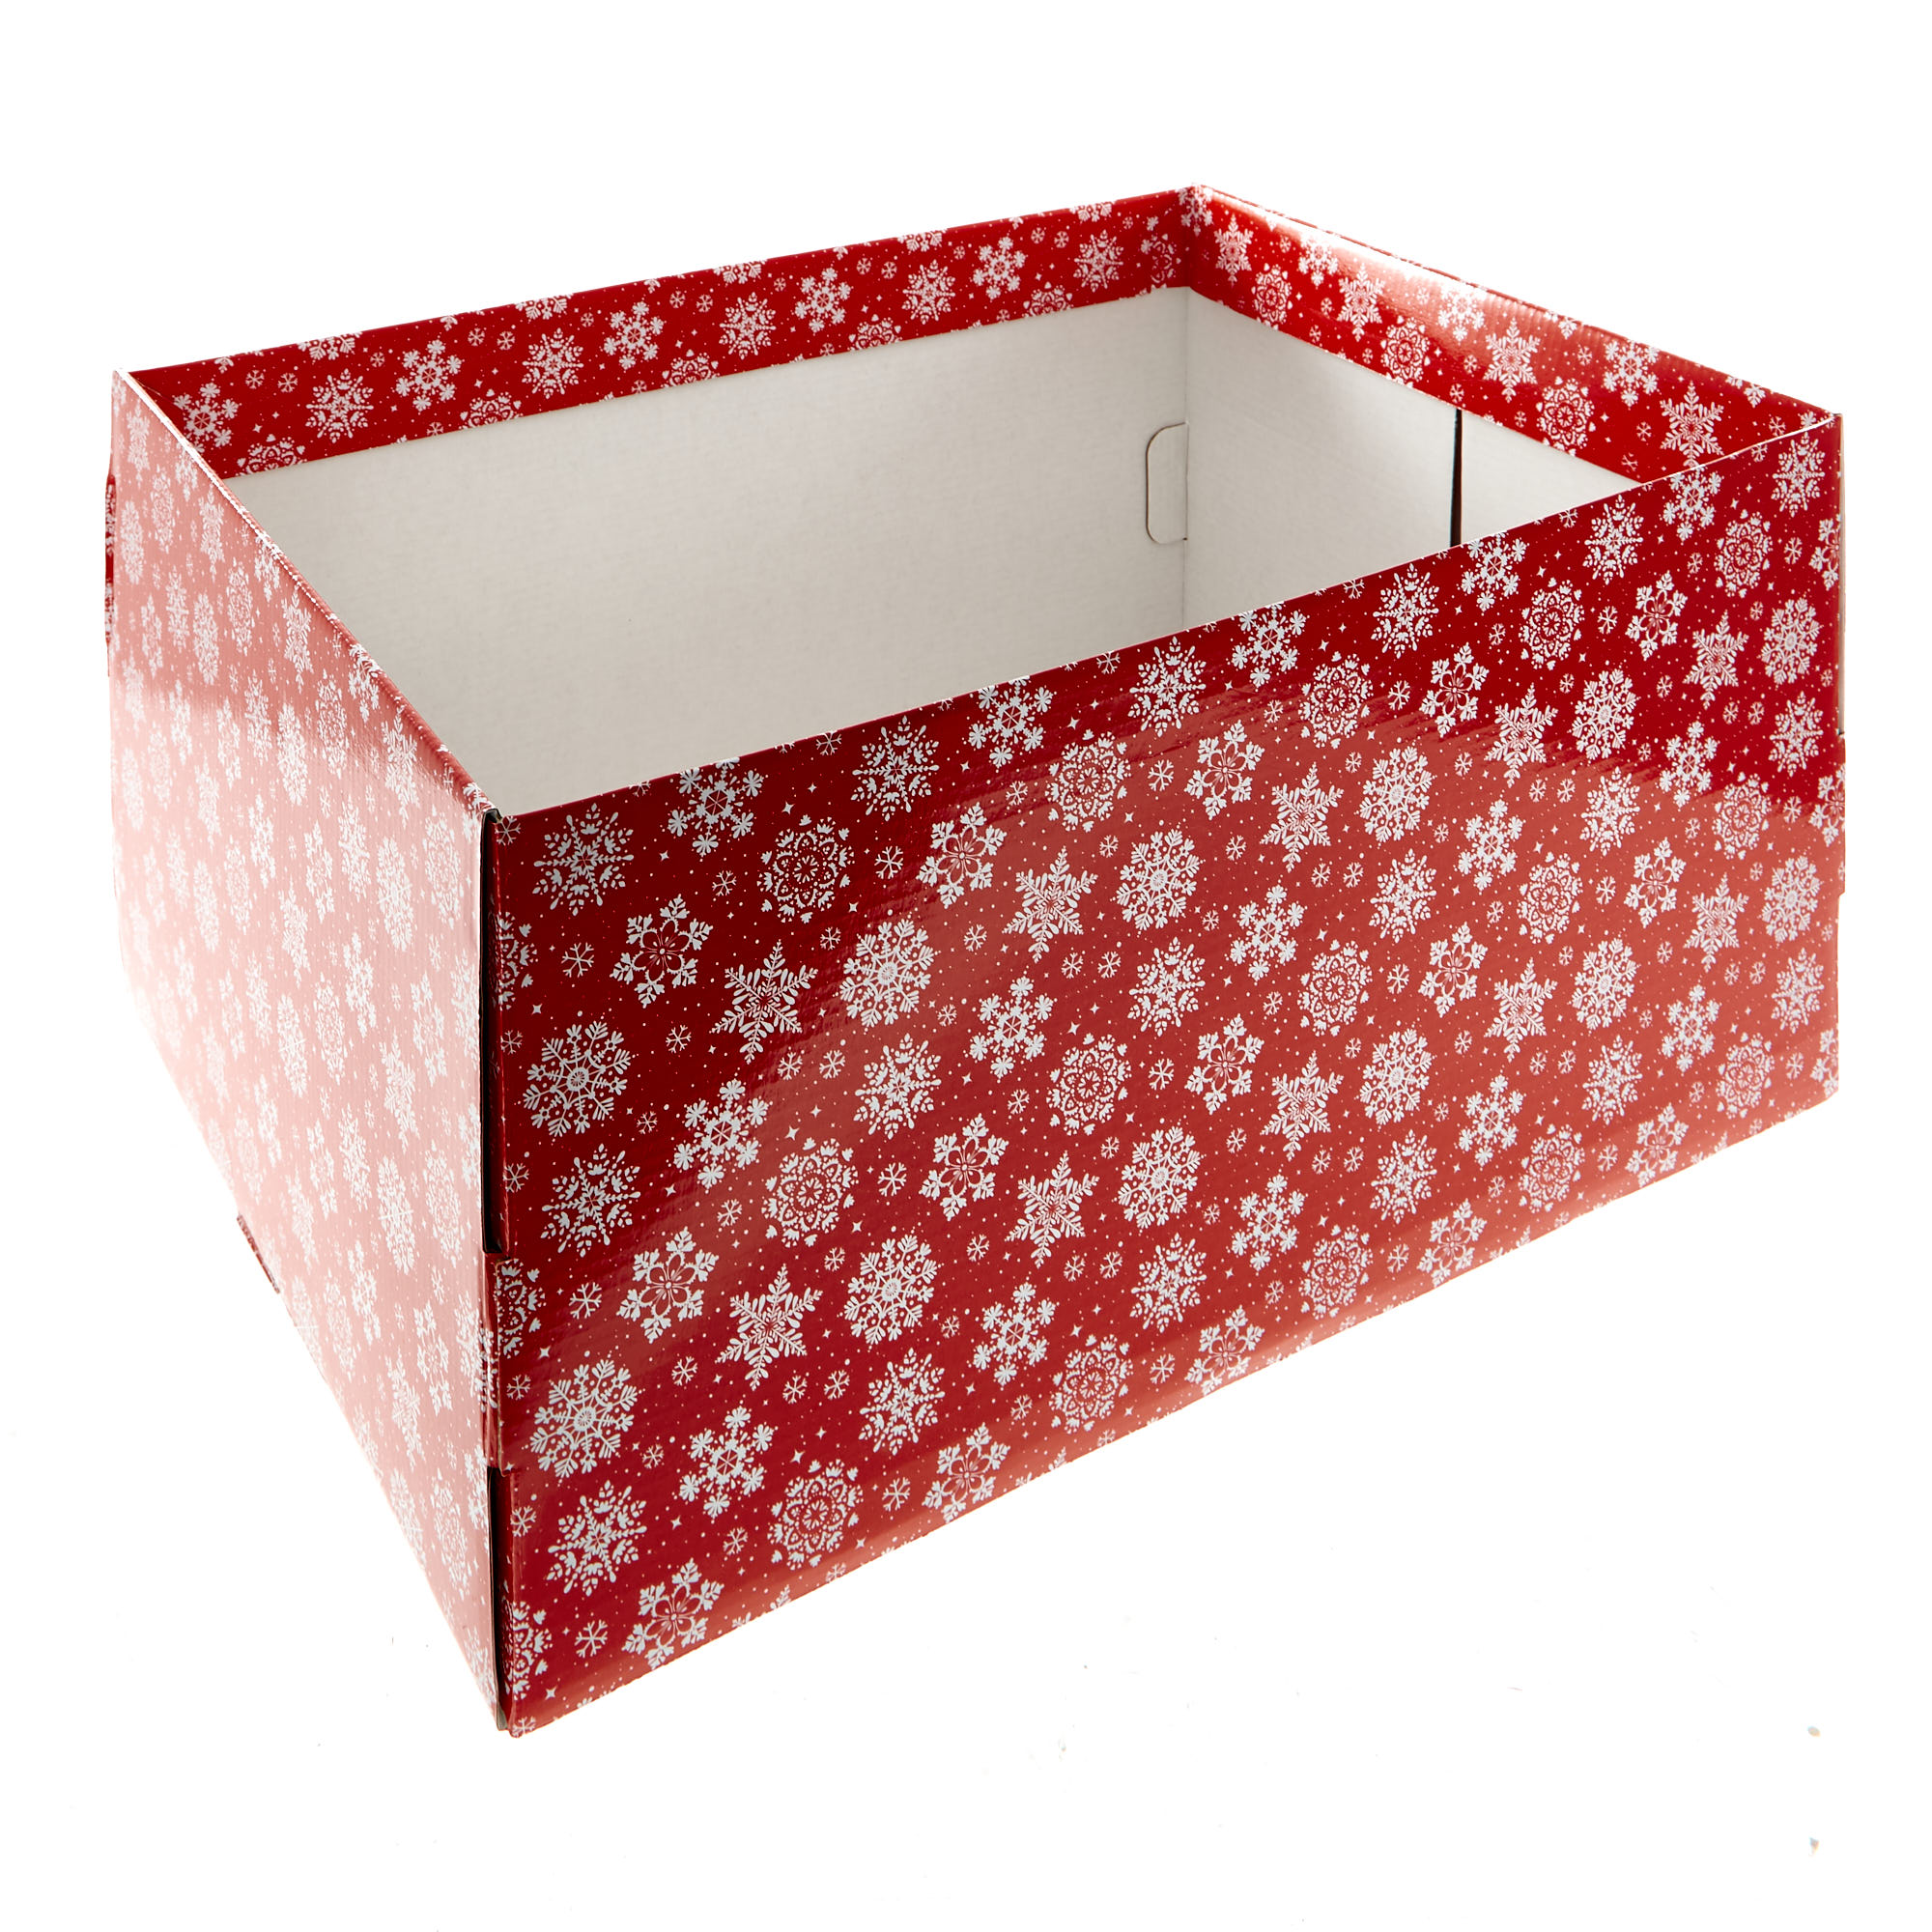 Red & White Snowflakes Flat-Pack Crate Gift Box 